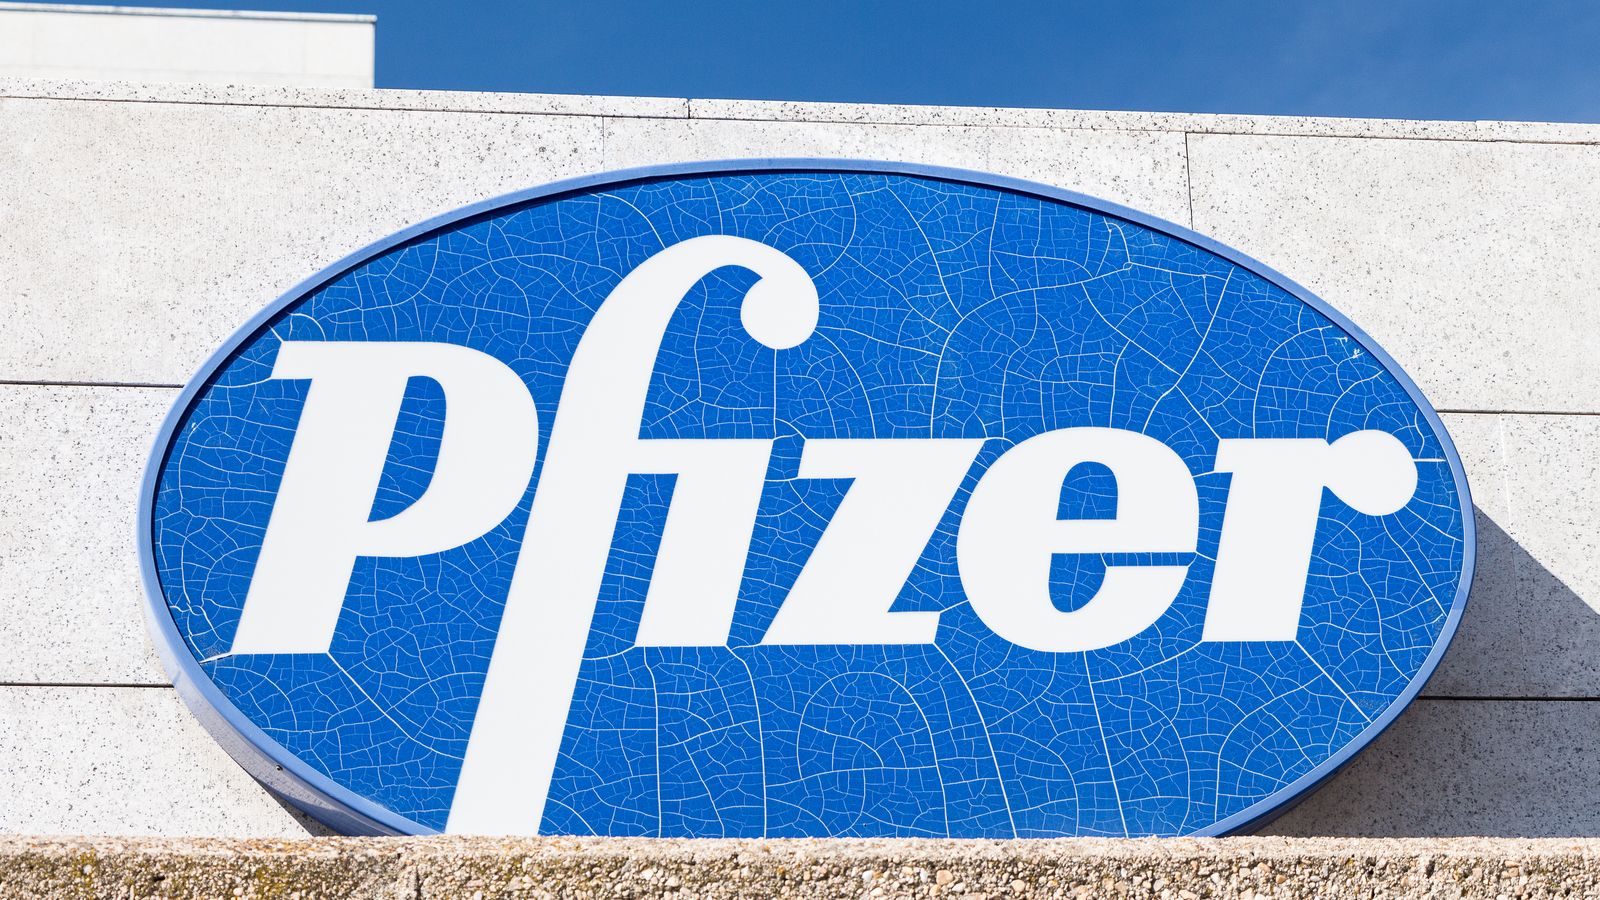 Pfizer Is Still One of the Healthcare Sector’s Best Dividend Yielders